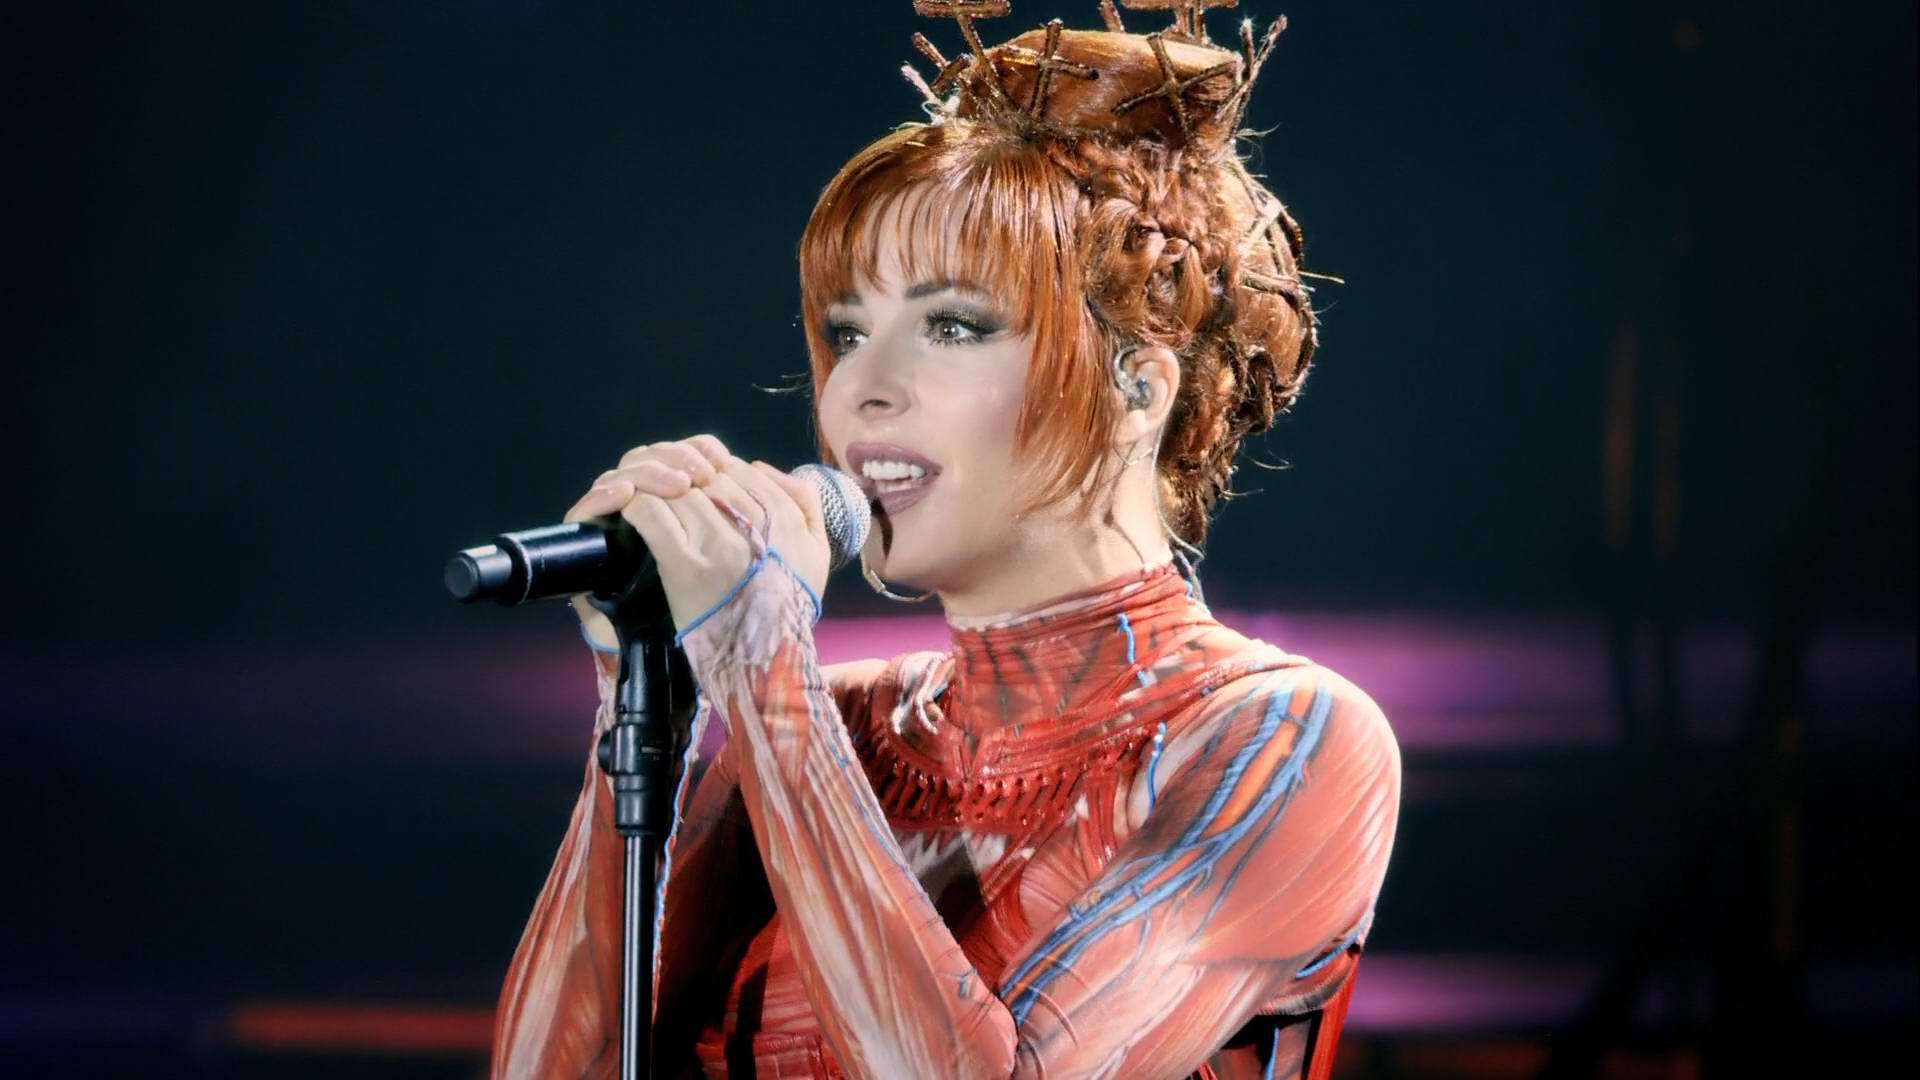 Mylene Farmer Wallpapers Images Photos Pictures Backgrounds